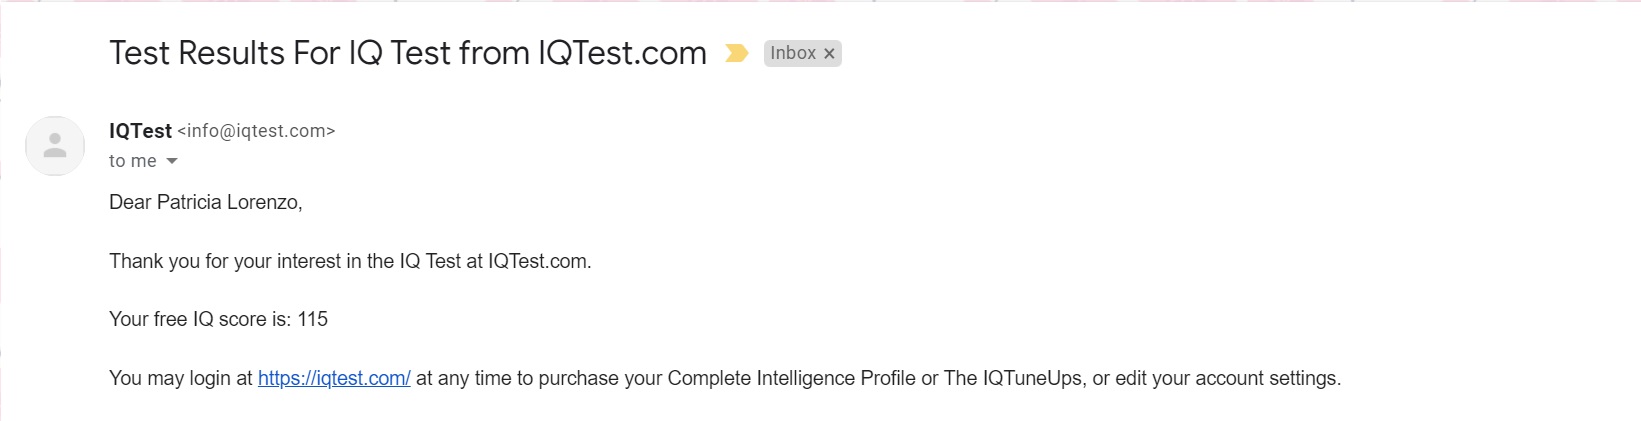 IQ Test result of 115